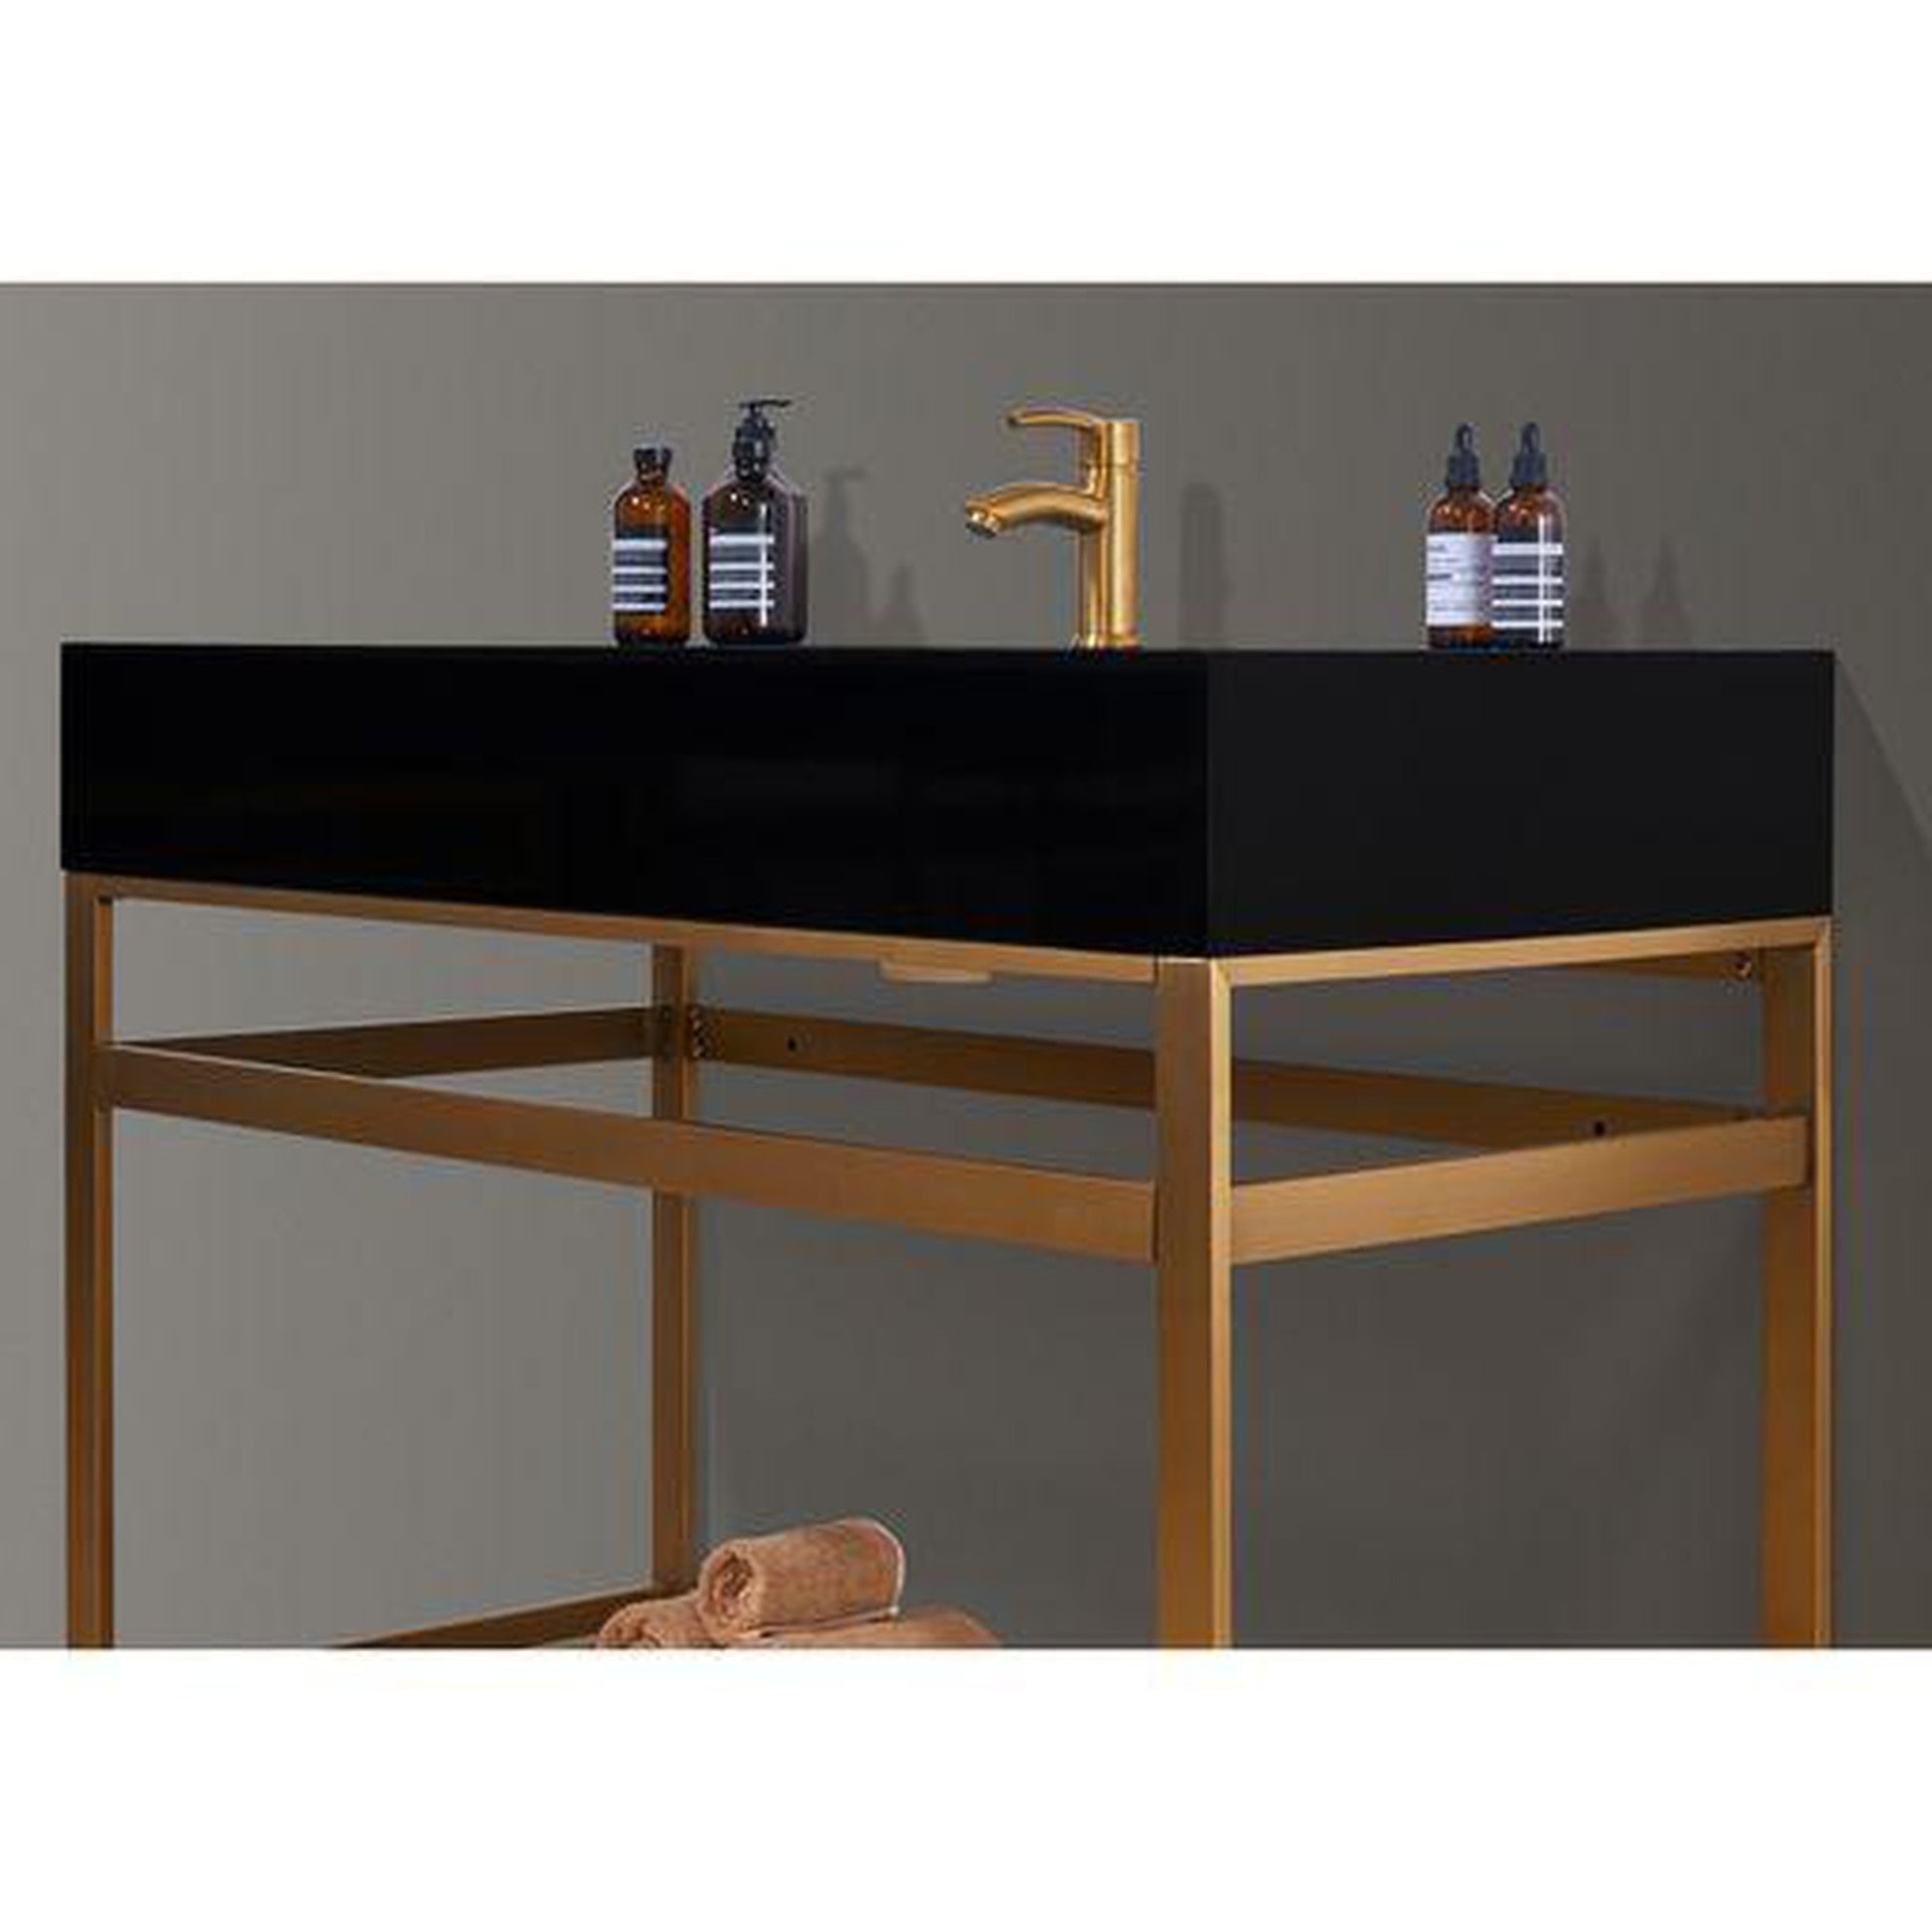 Altair Nauders 42" Brushed Gold Single Stainless Steel Bathroom Vanity Set Console With Mirror, Imperial Black Stone Top, Single Rectangular Undermount Ceramic Sink, and Safety Overflow Hole